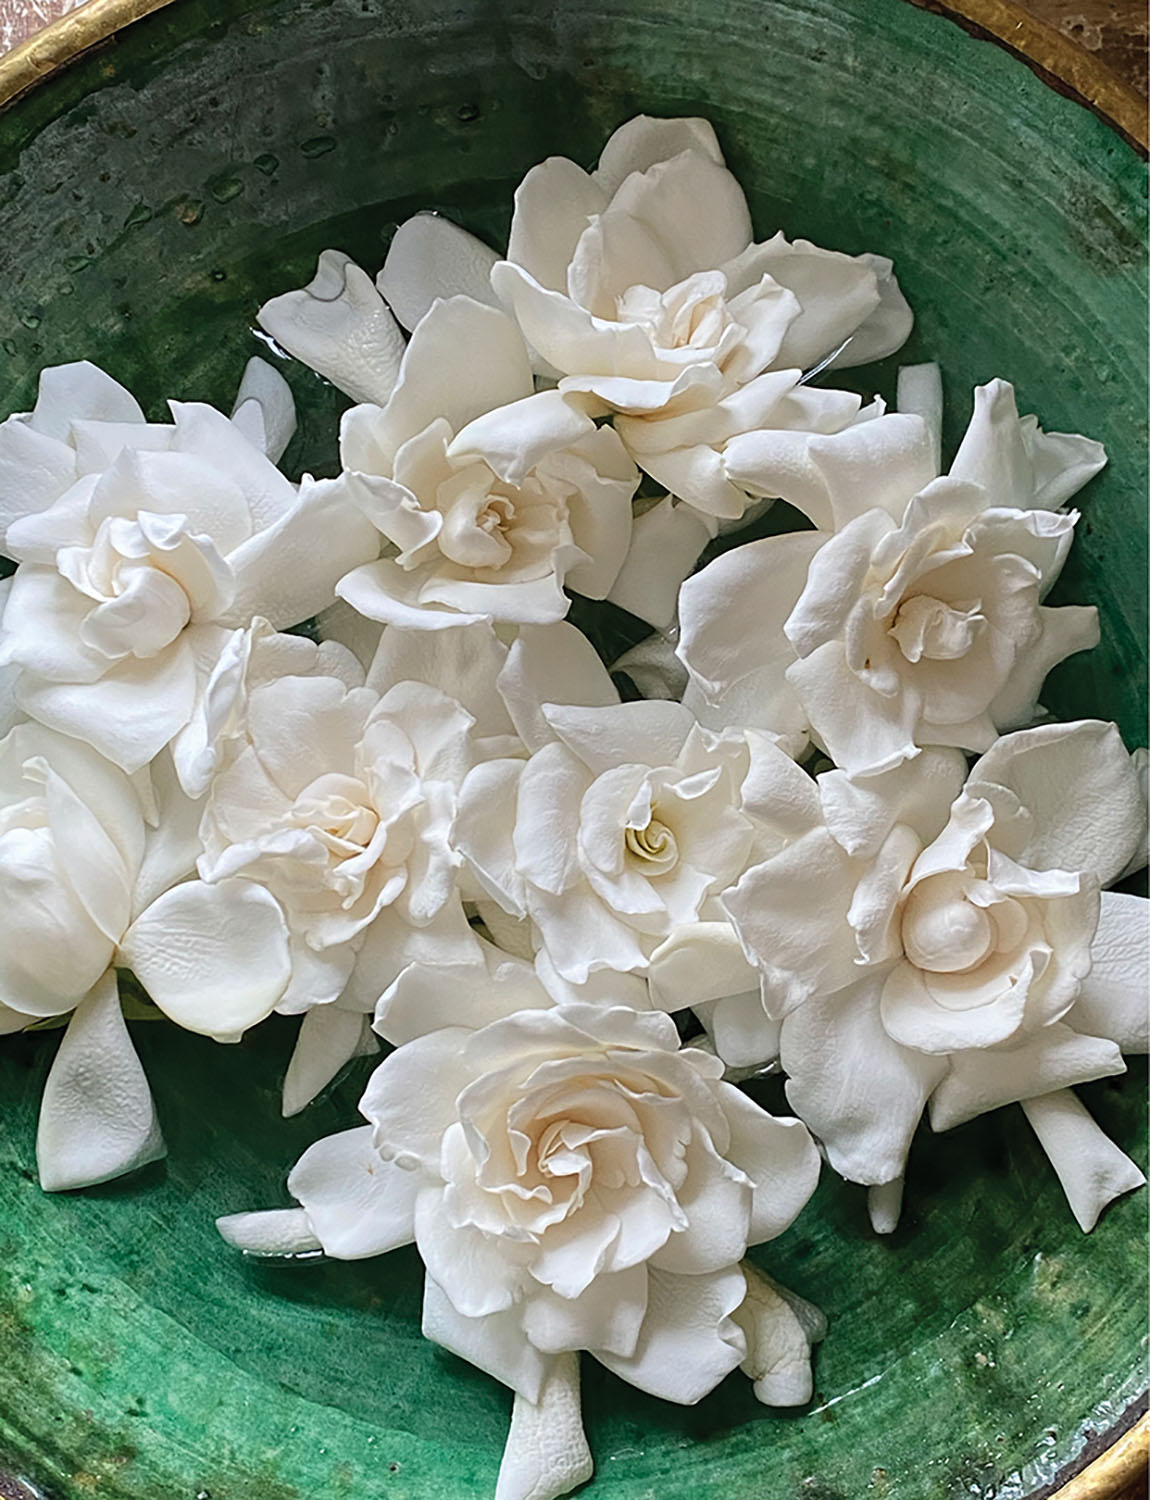 Gardenia blooms floating in a green bowl.